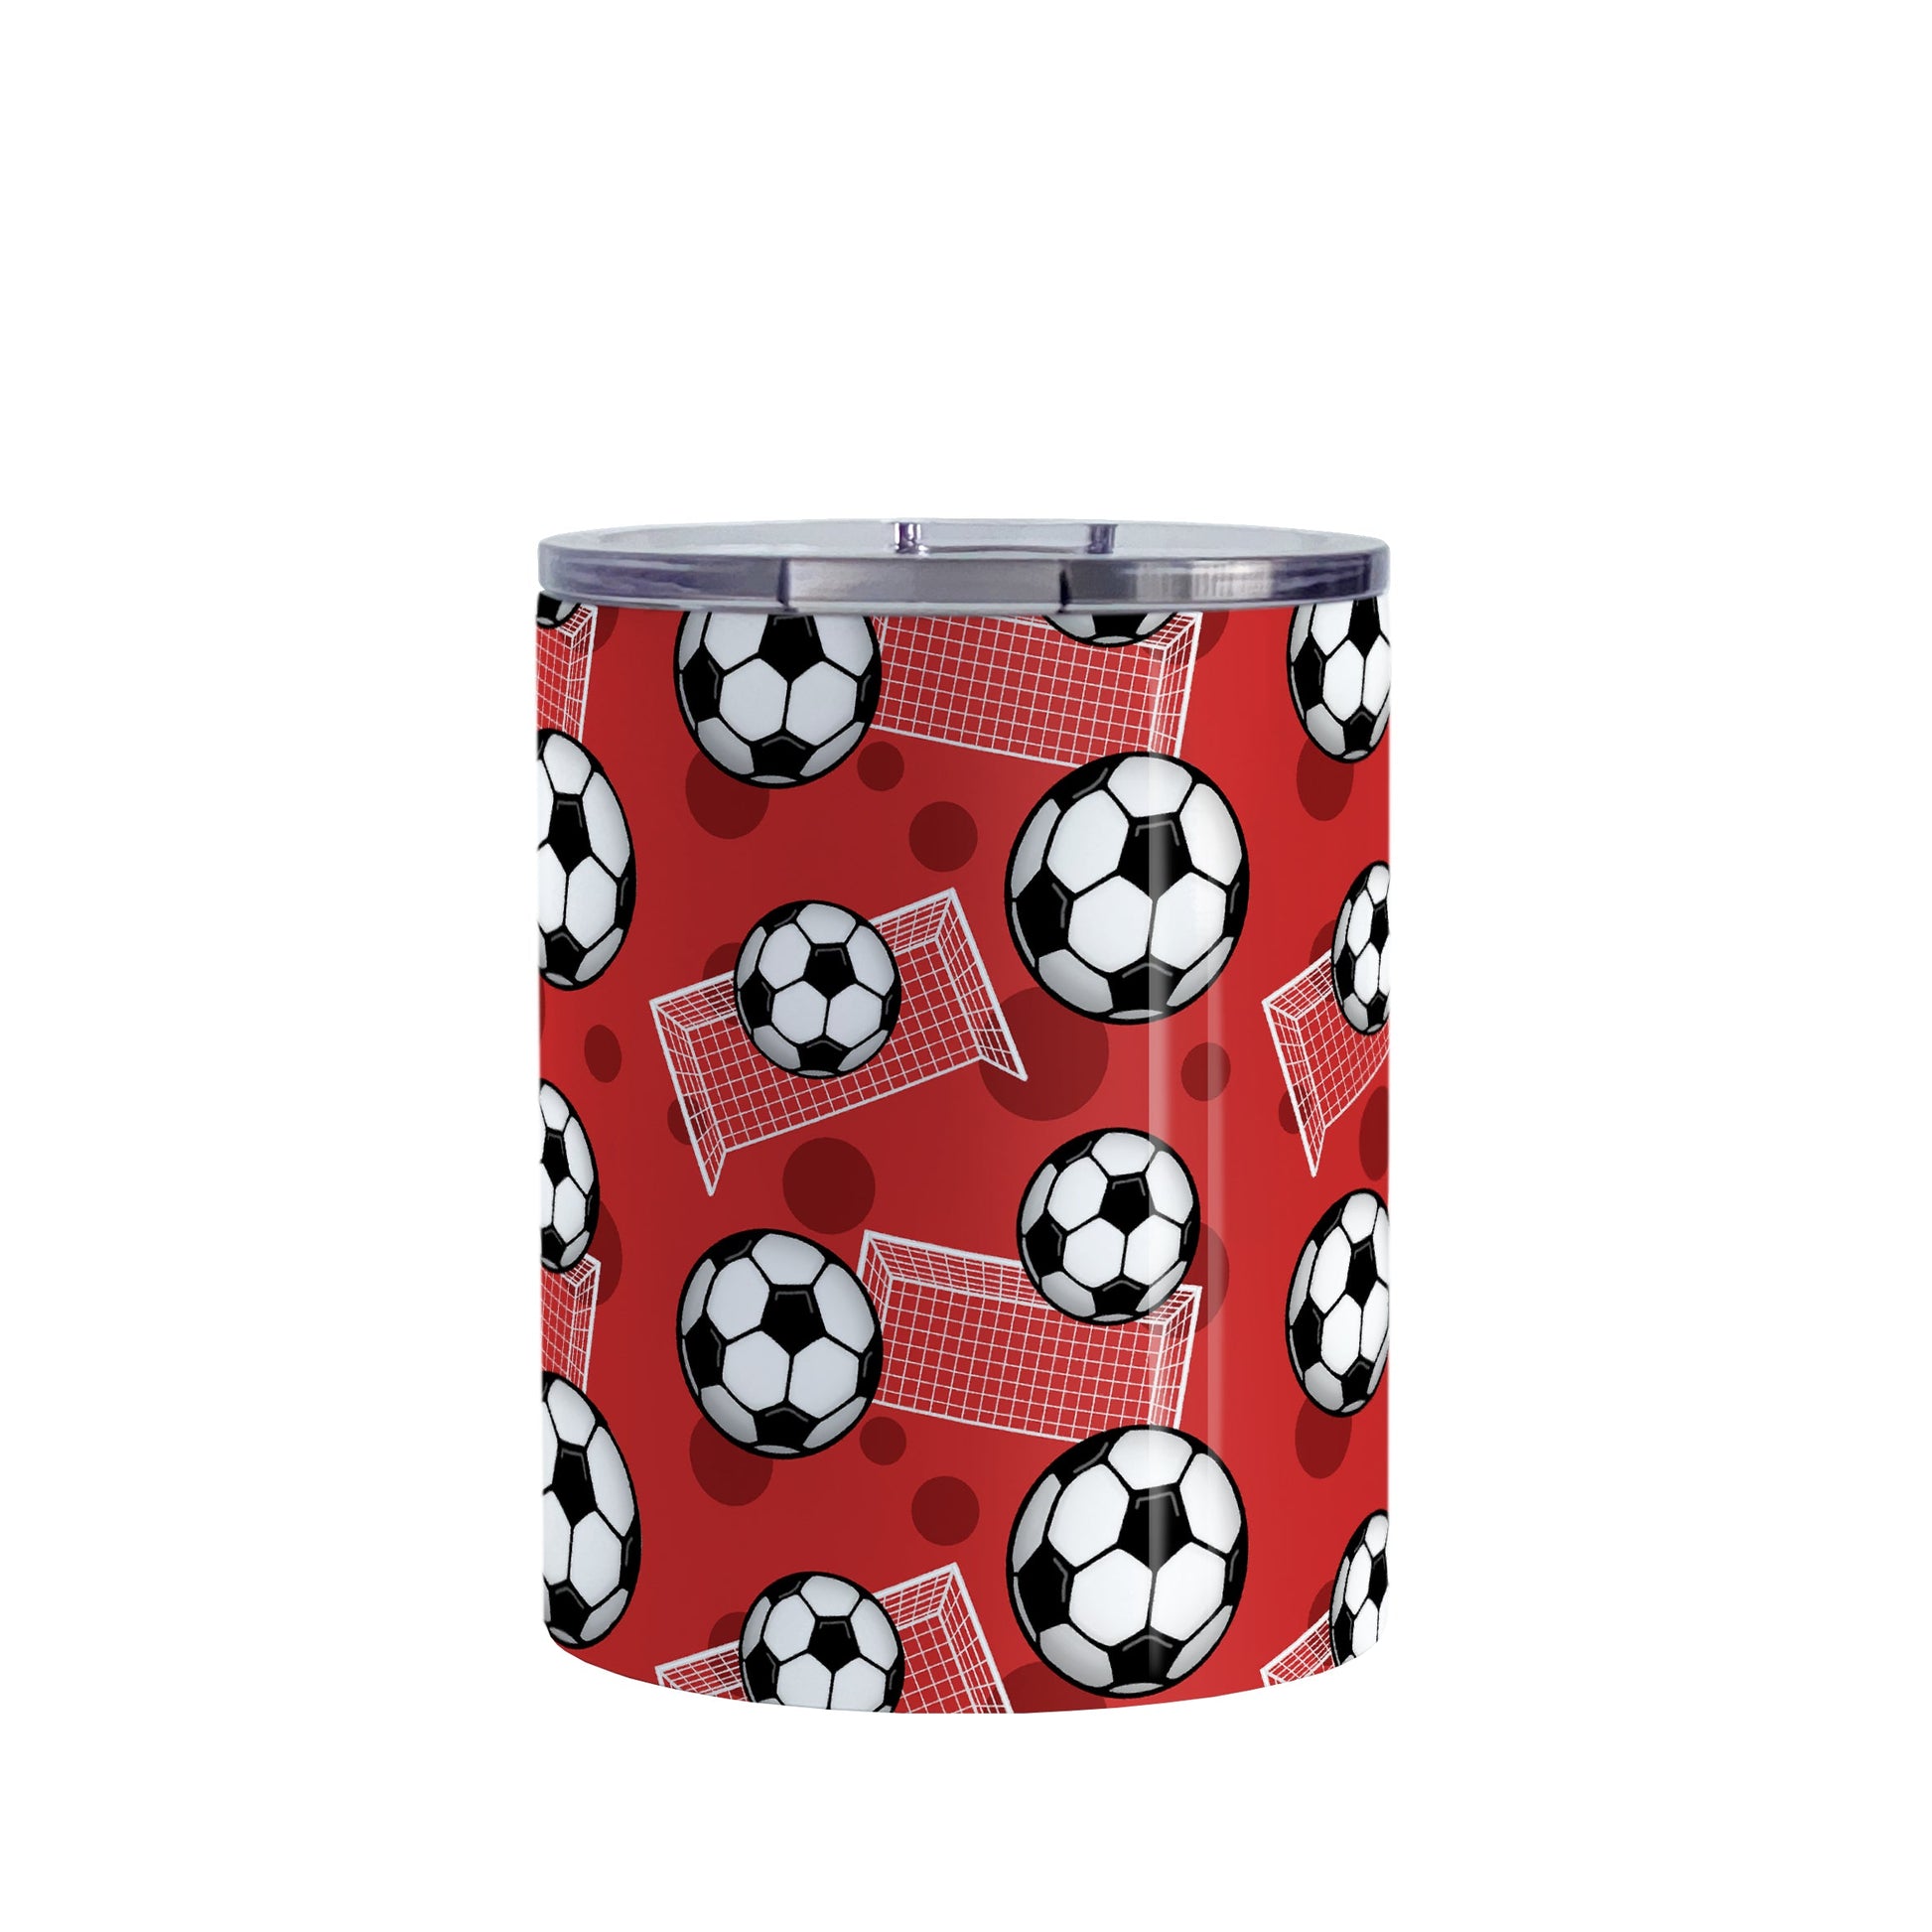 Soccer Ball and Goal Pattern Red Tumbler Cup (10oz) at Amy's Coffee Mugs. A stainless steel insulated tumbler cup designed with a pattern of soccer balls and goals over a red background that wraps around the cup. This red soccer tumbler cup is perfect for people who love or play soccer.